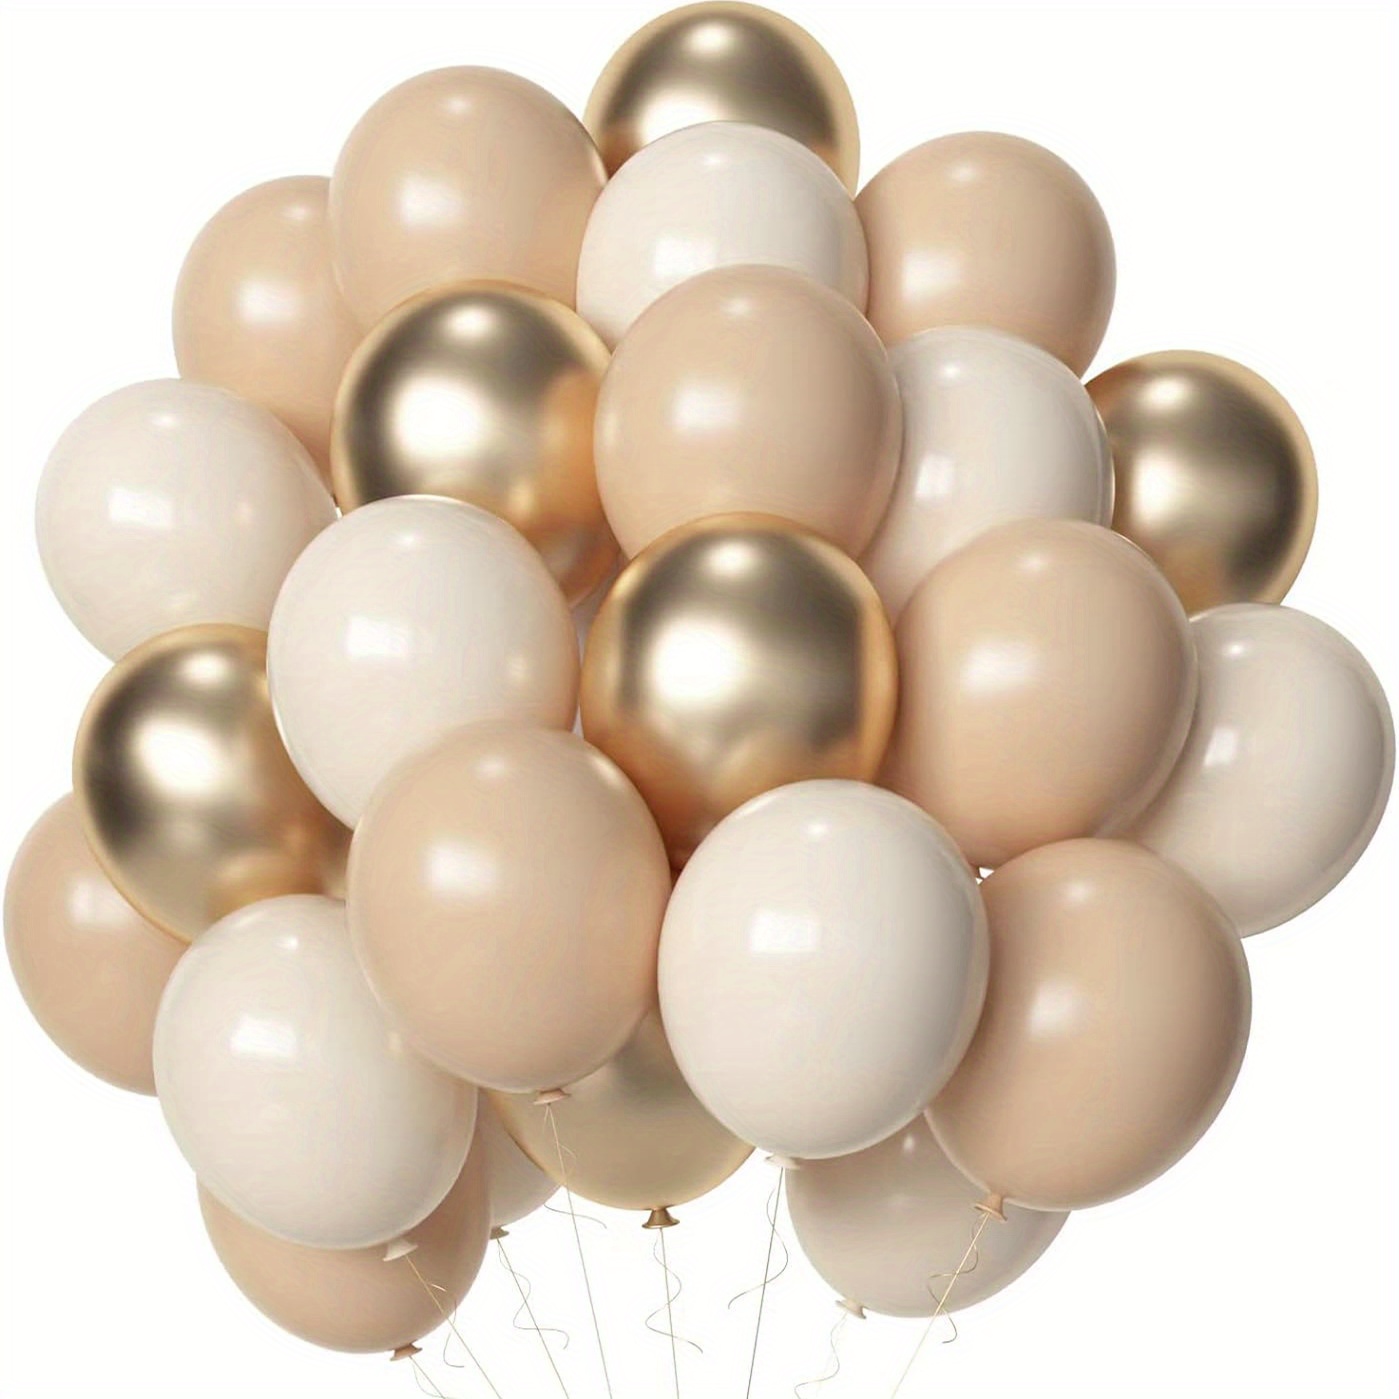 

60pcs Neutral Latex Balloons Set, Nude Gold Beige - Perfect For Wedding, Birthday, Gender Reveal, Baby Shower, Baptism - Emulsion Material, No Electricity Required, Suitable For Ages 14+